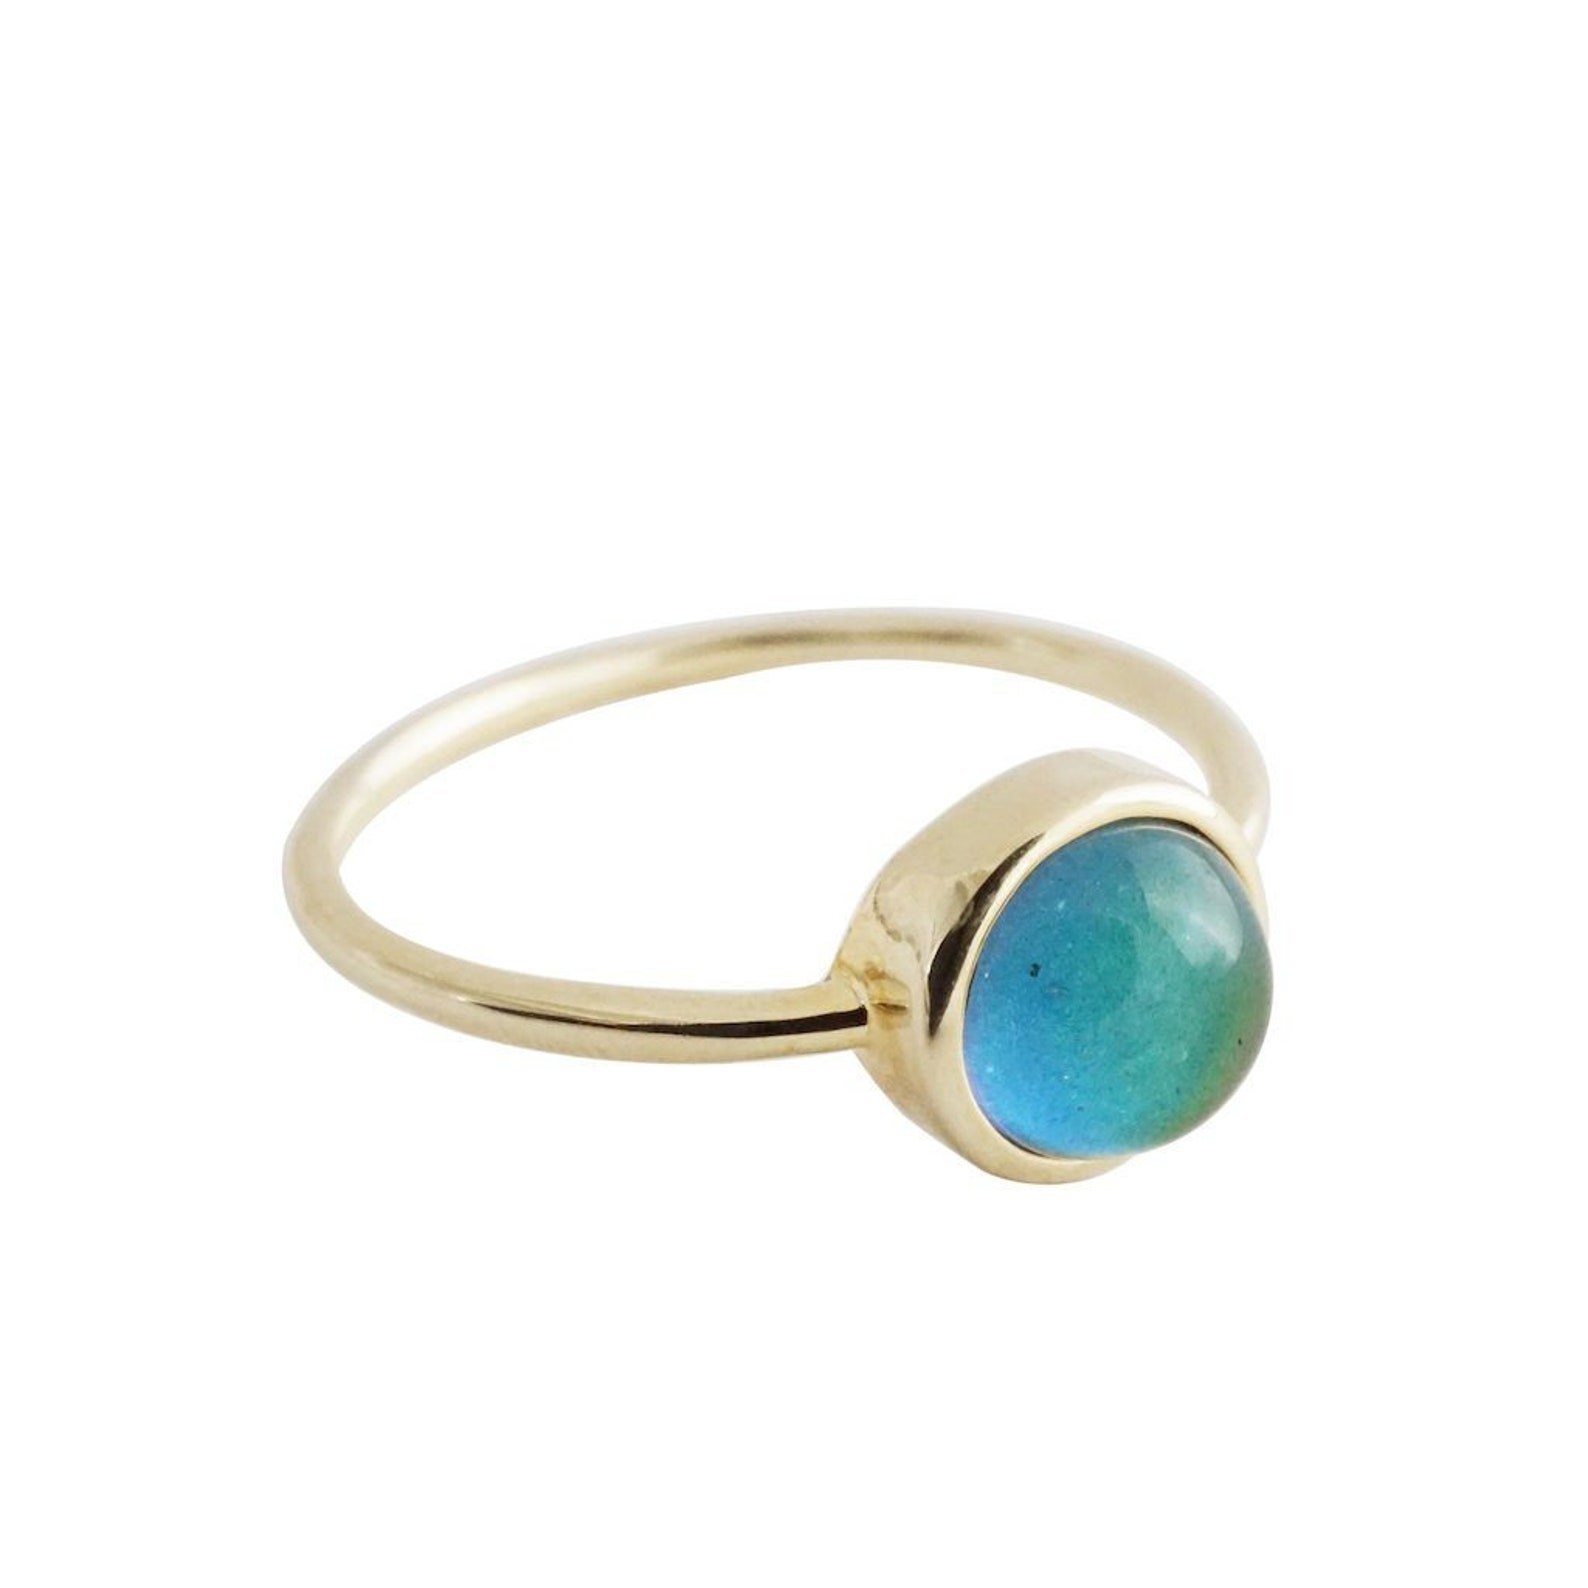 A moodring with a blue and green stone.